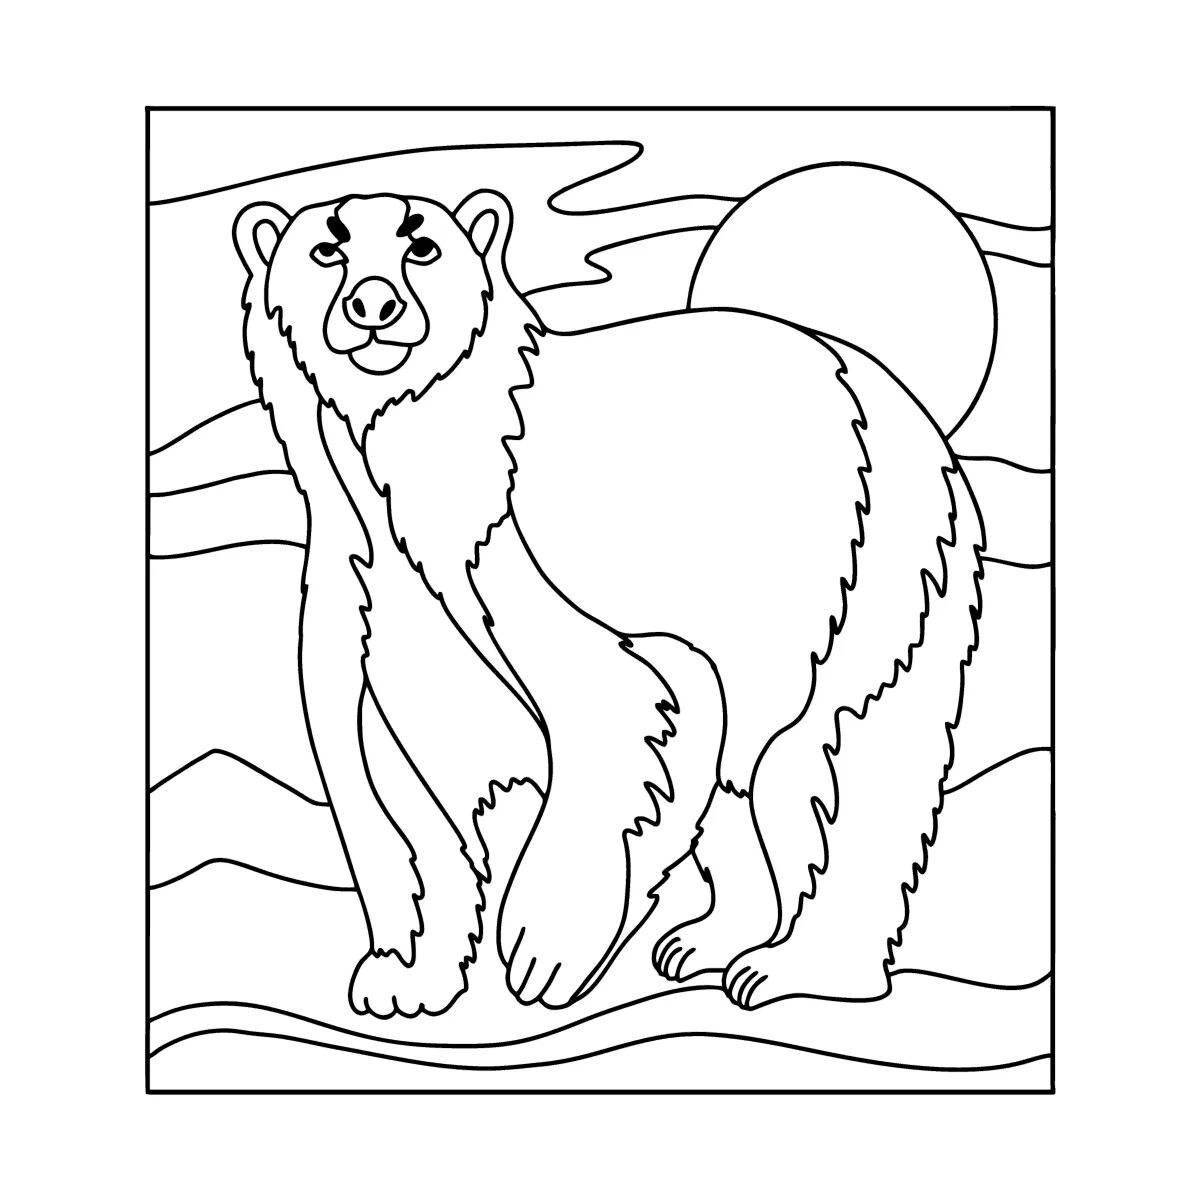 Adorable polar bear coloring book for 4-5 year olds